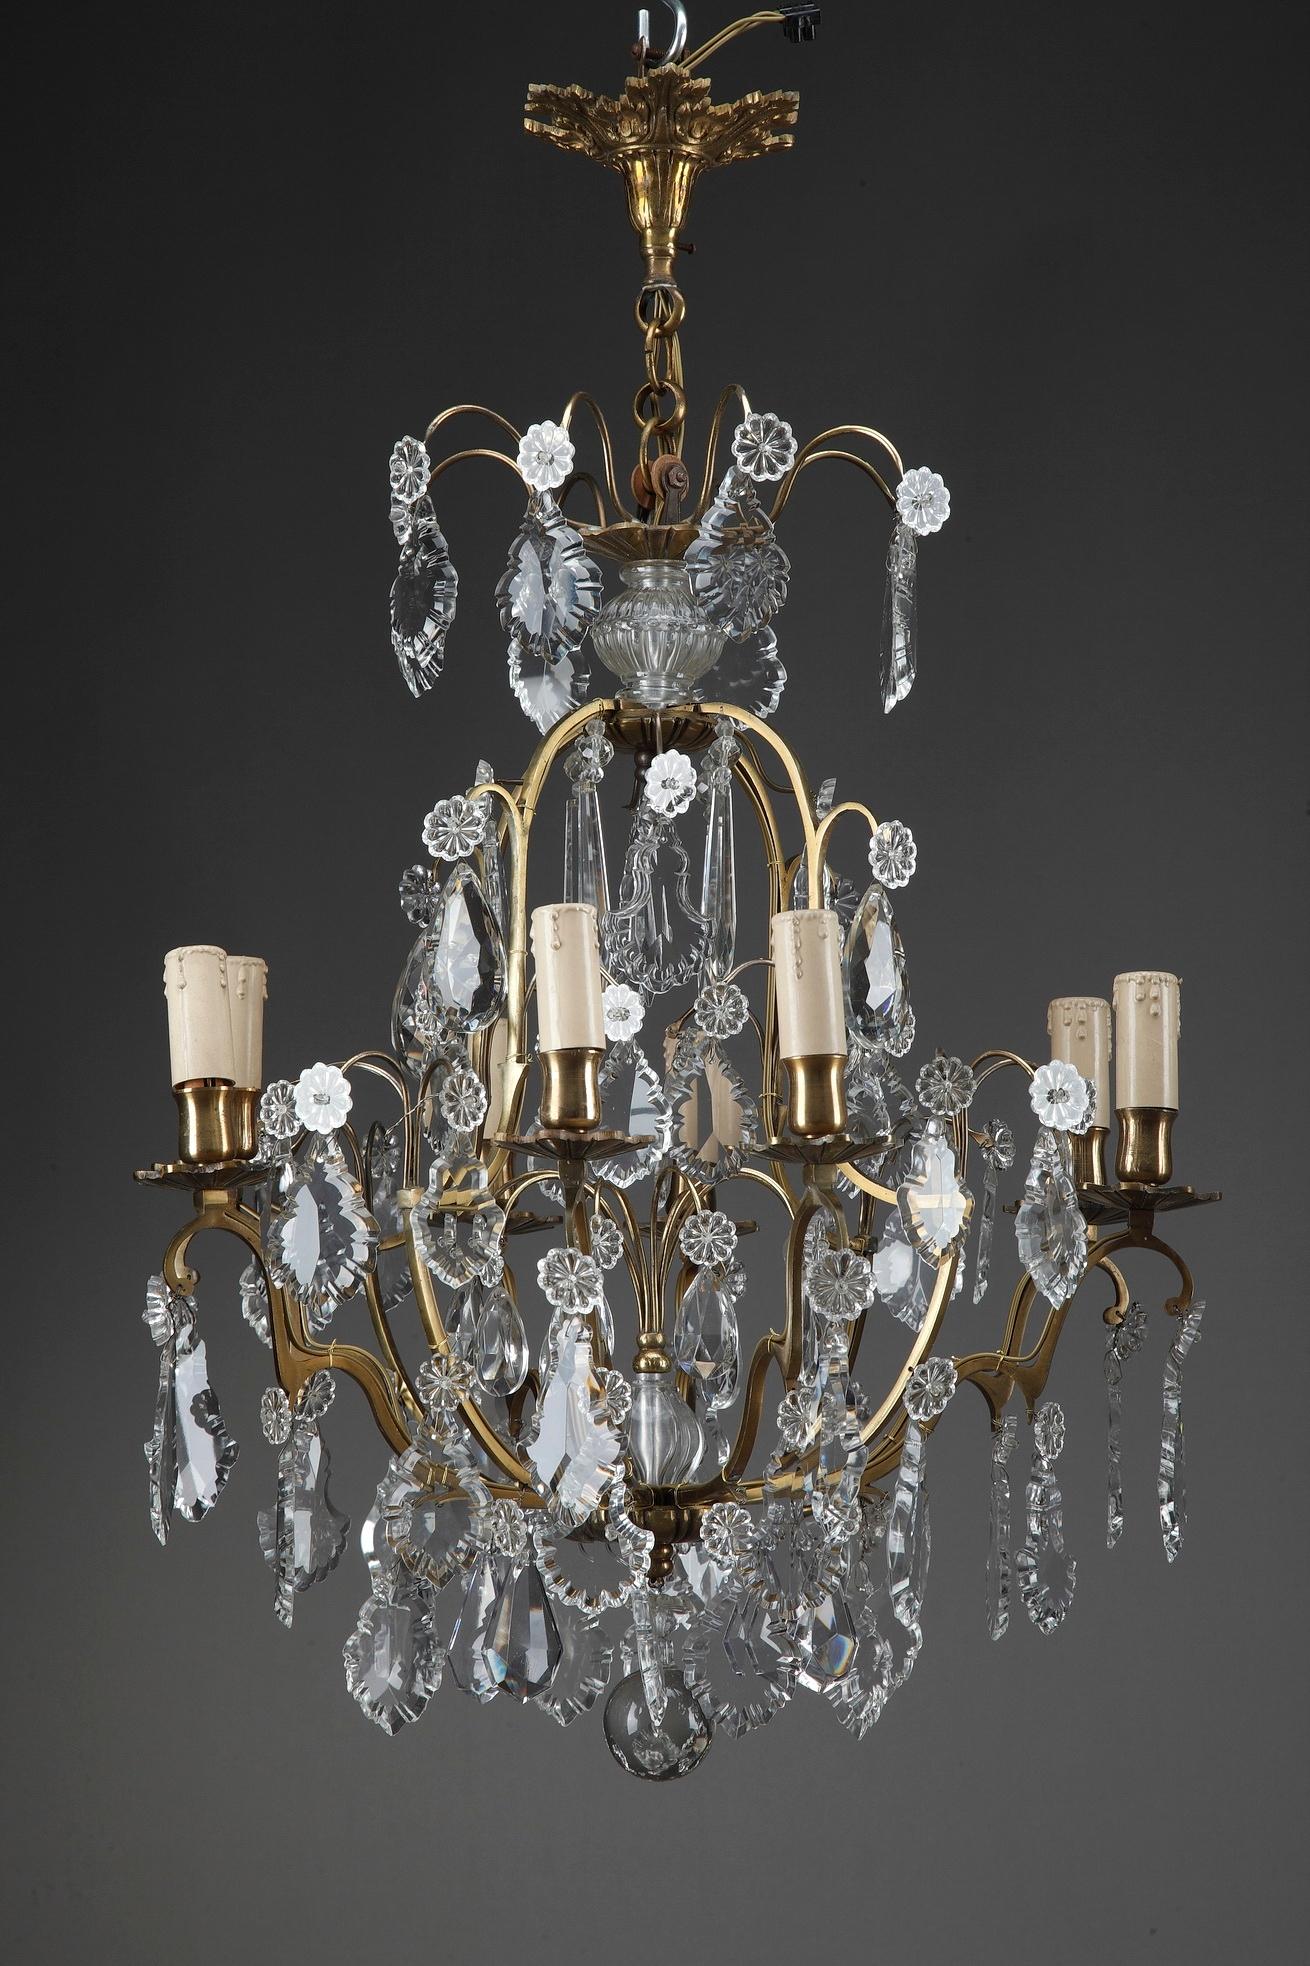 Pair of 8-light antique French chandeliers featuring floral motif and oversized drops of crystal. The eight lights of this fixture are supported by scrolling branches cast in ormolu or gilt bronze. Late 19th century period,

circa